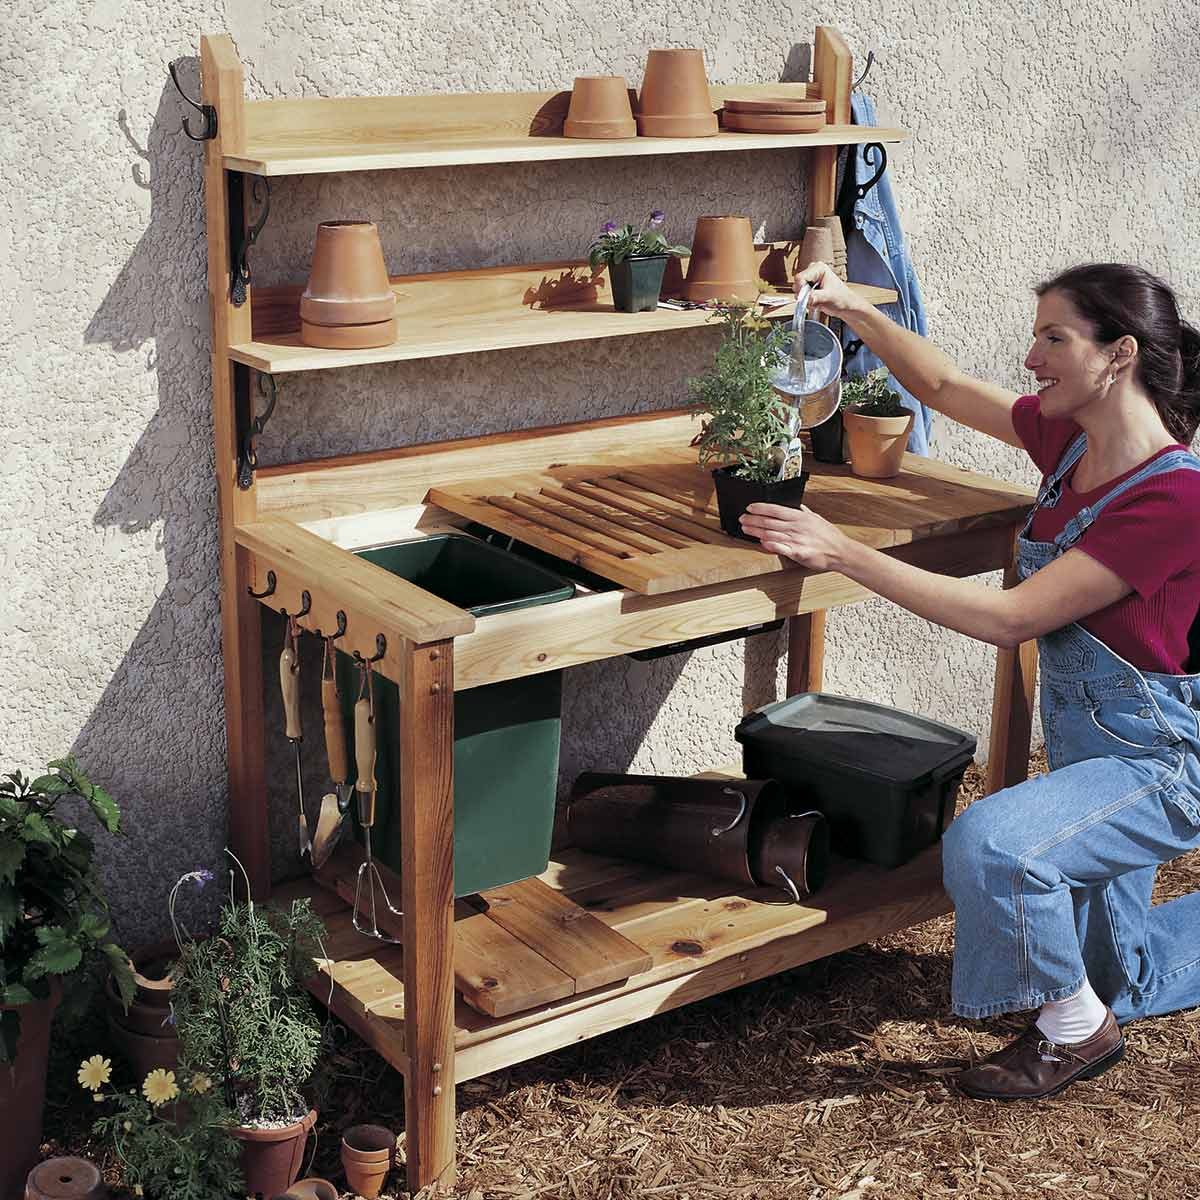 40 Outdoor Woodworking Projects For Beginners The Family - 